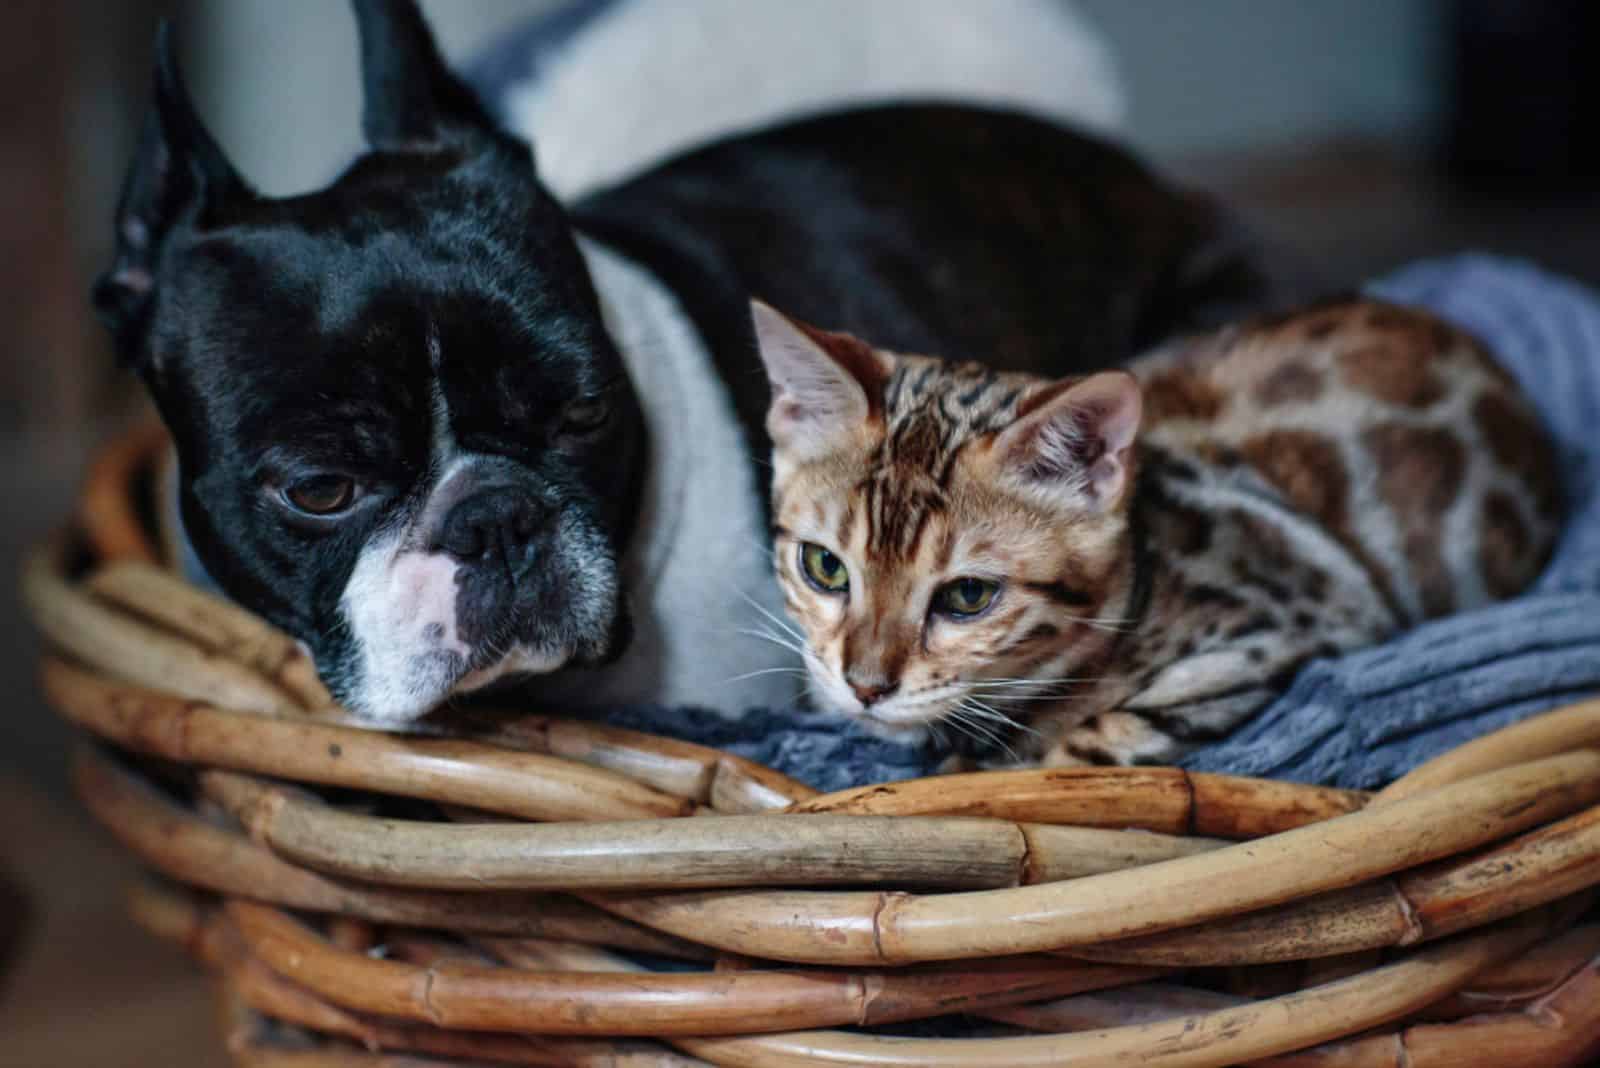 The Boston Terrier with cat